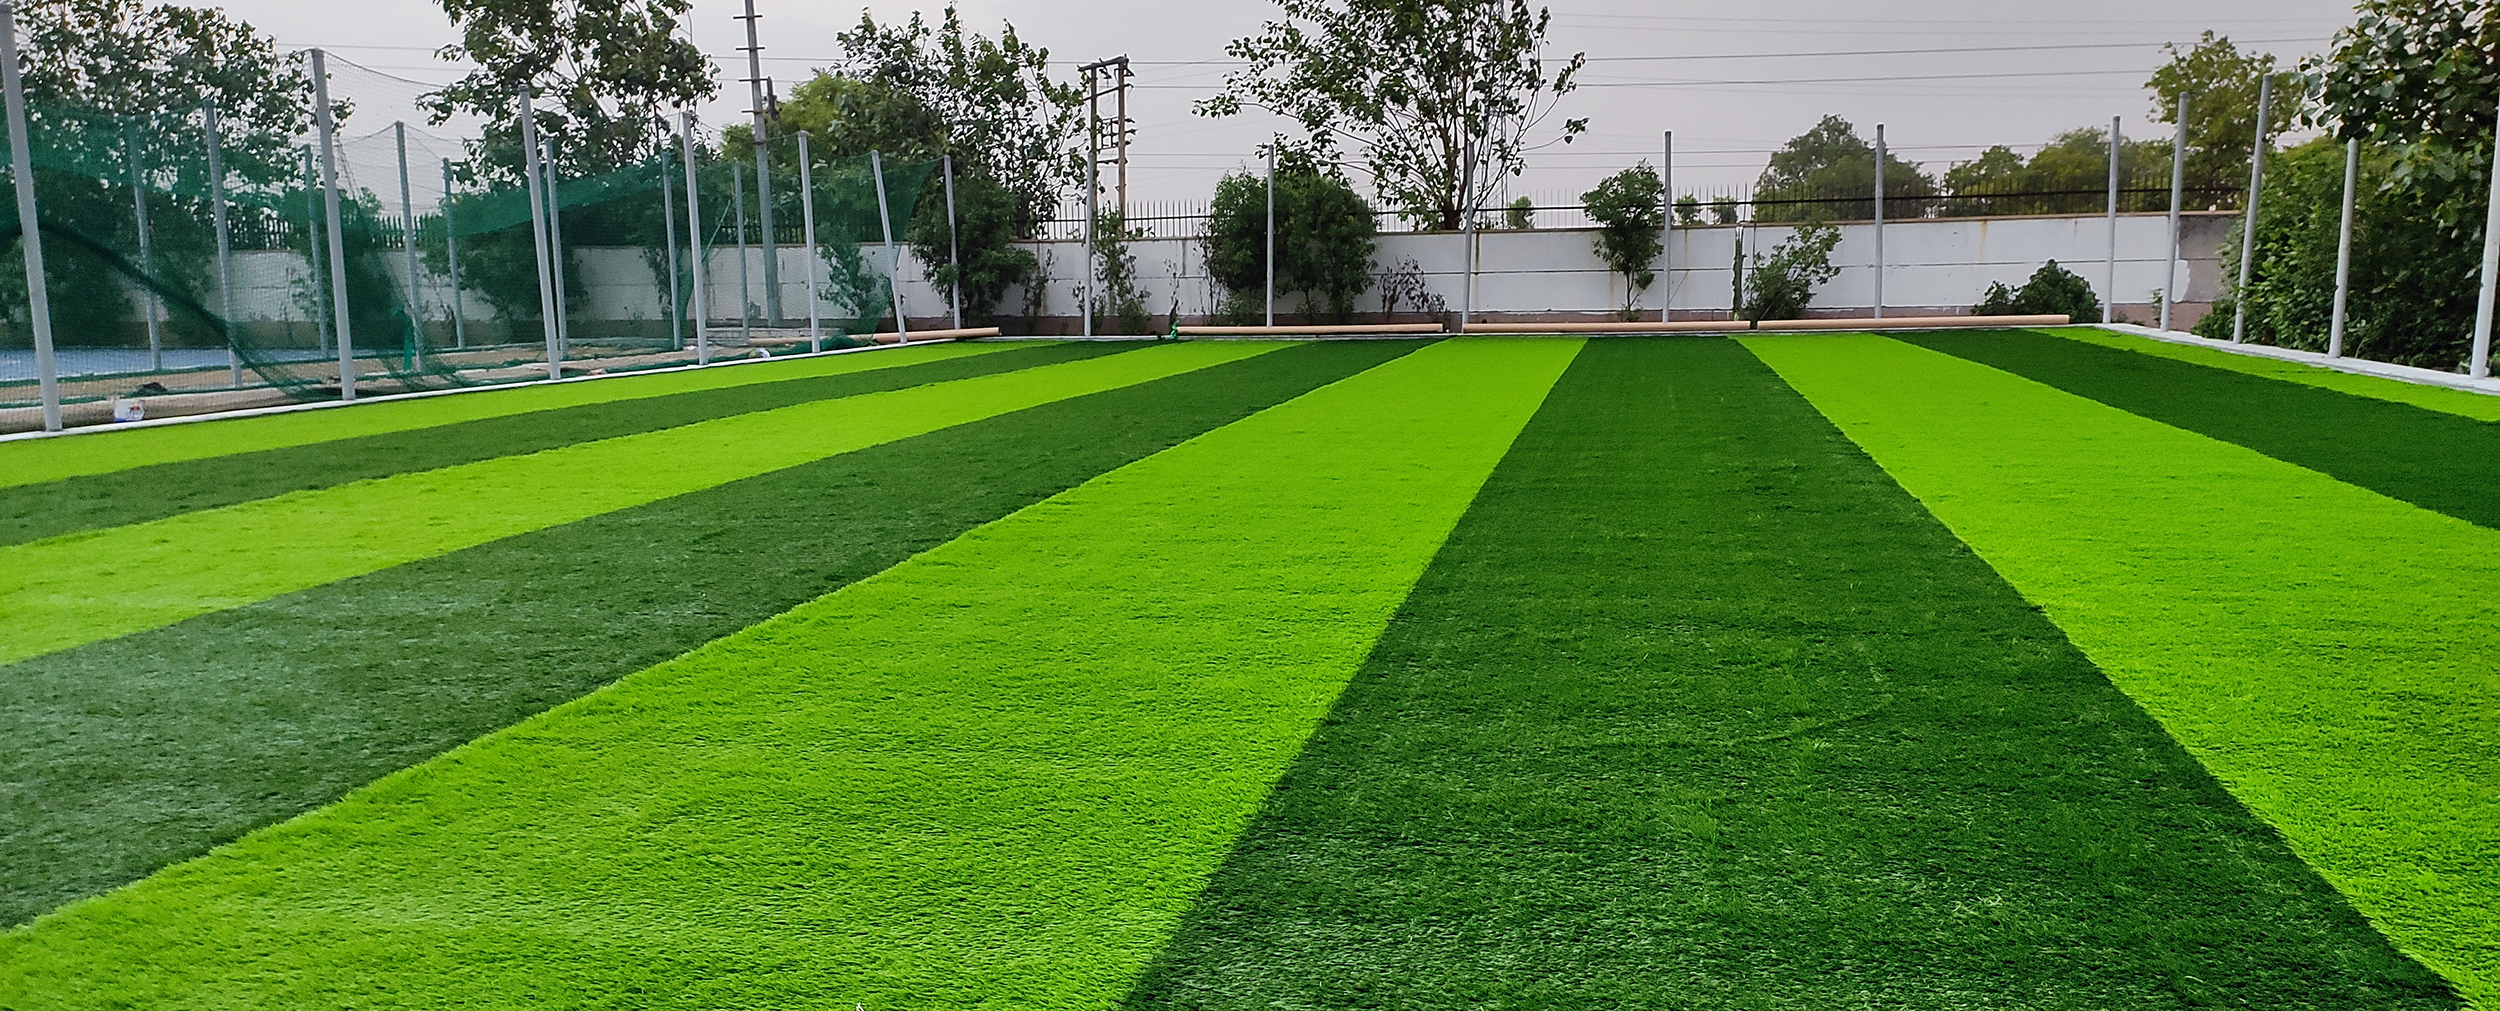 Reasons Why Artificial Grass in Bangalore is Gaining Popularity